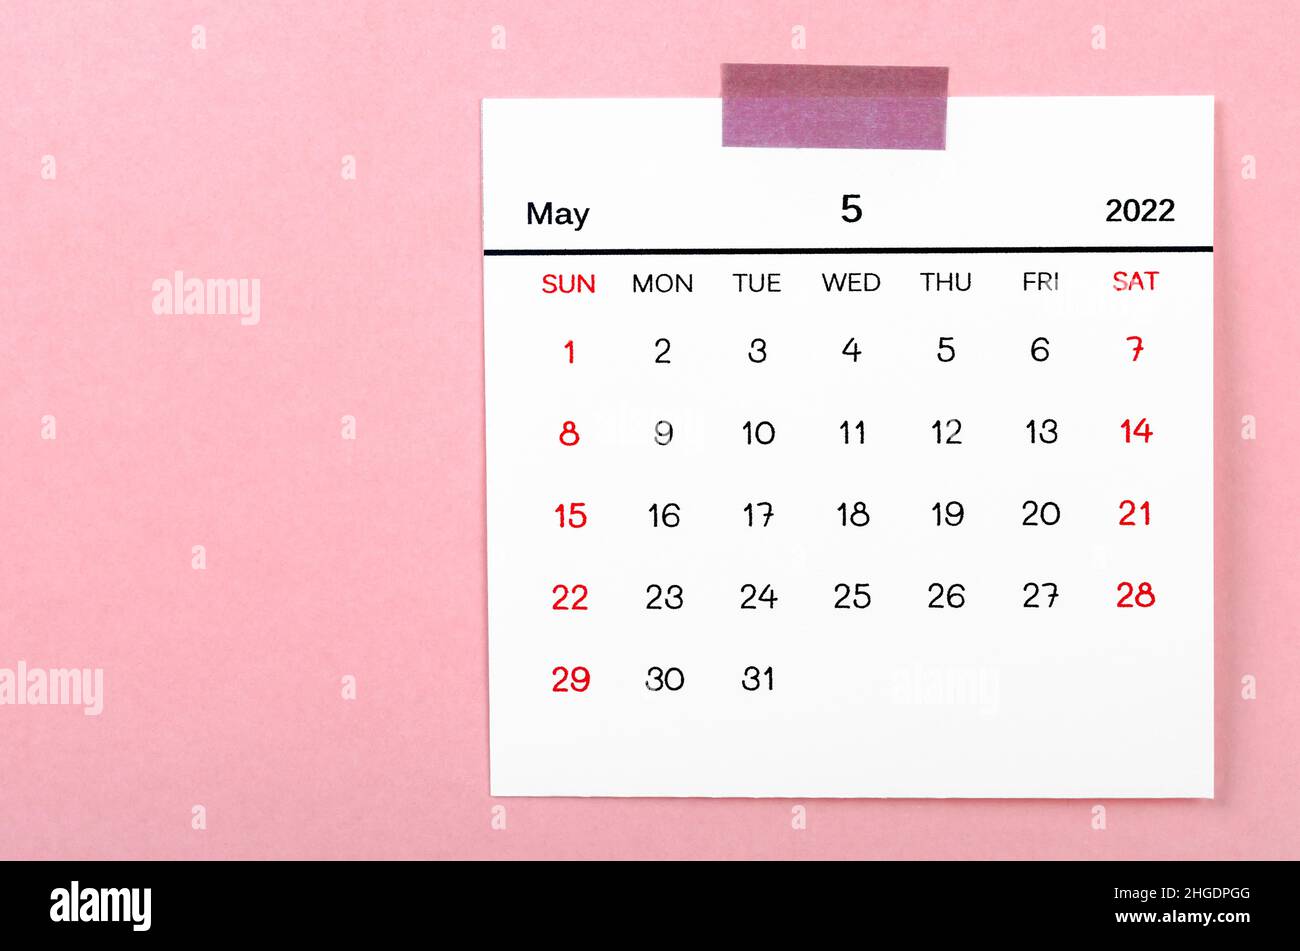 The May 2022 calendar on pink background. Stock Photo